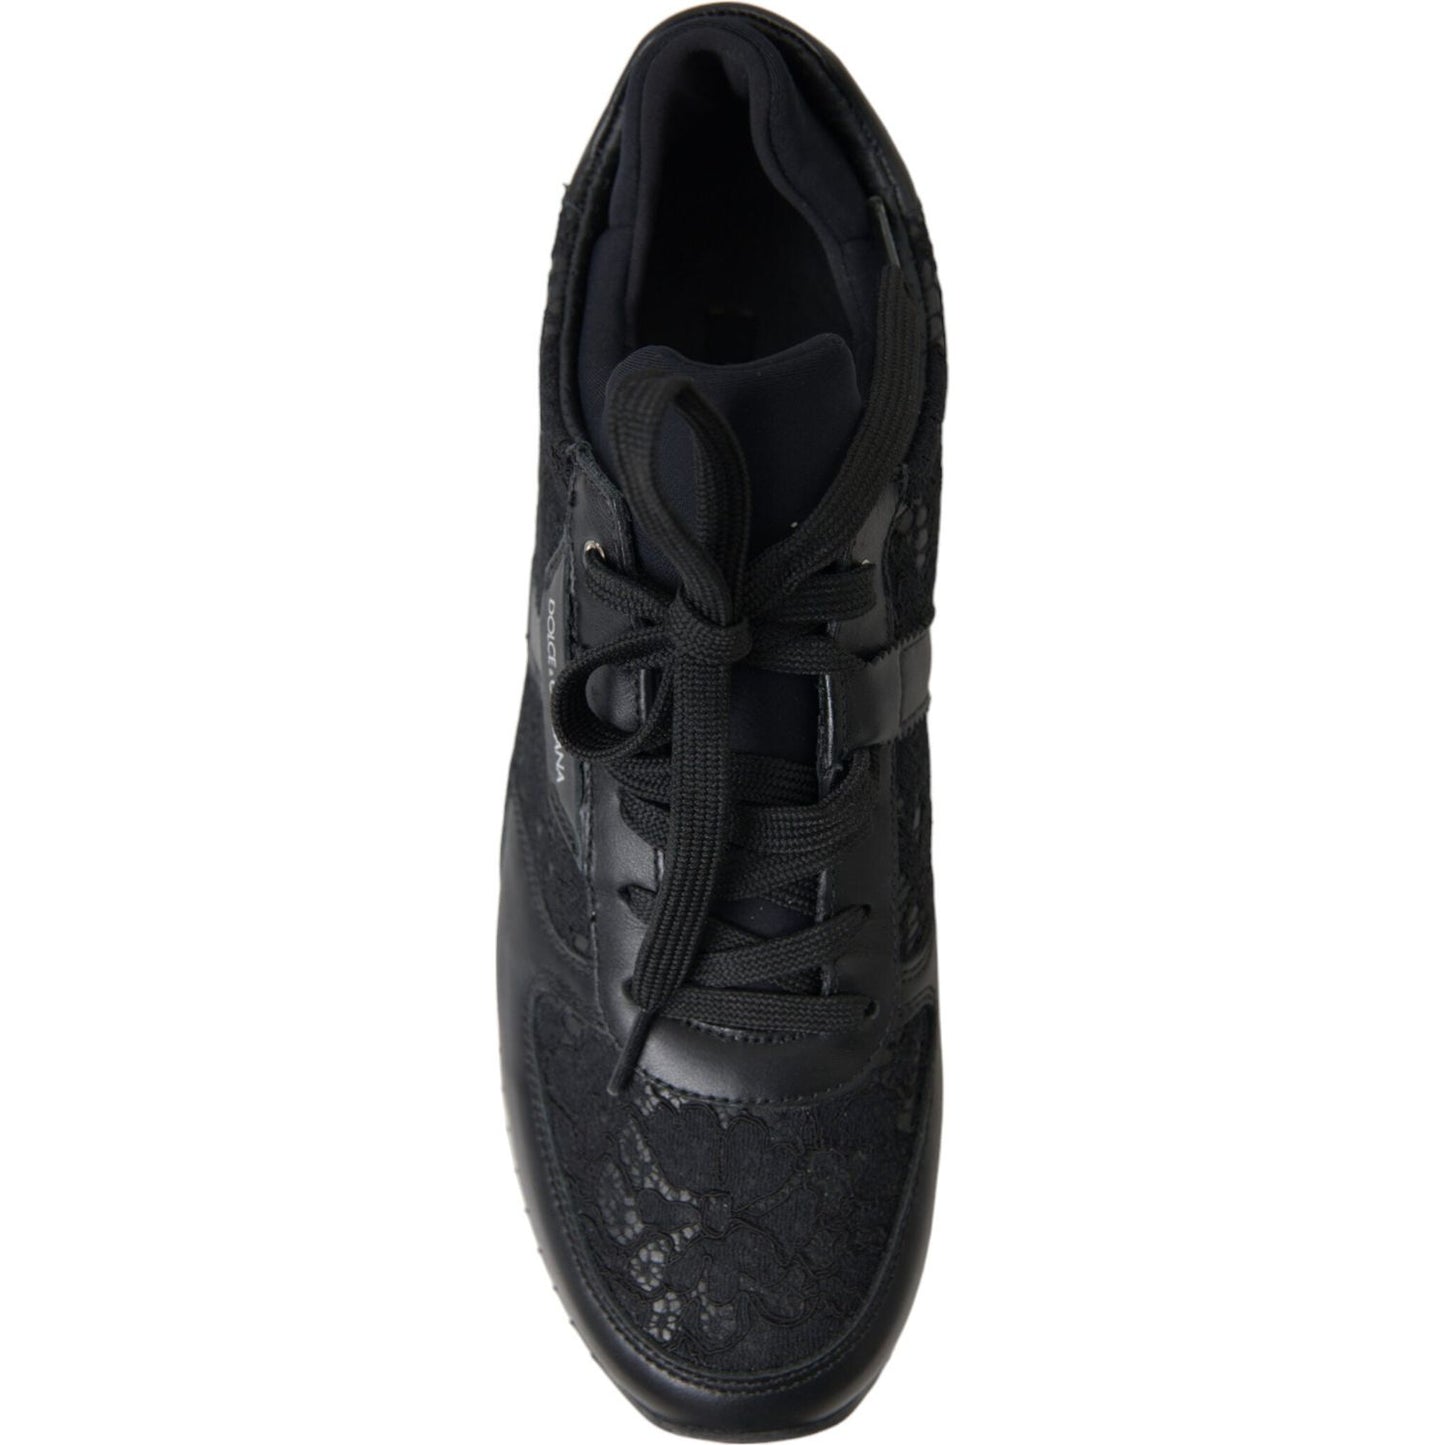 Dolce & Gabbana Elegant Black Classic Sneakers black-floral-lace-leather-sneakers-shoes